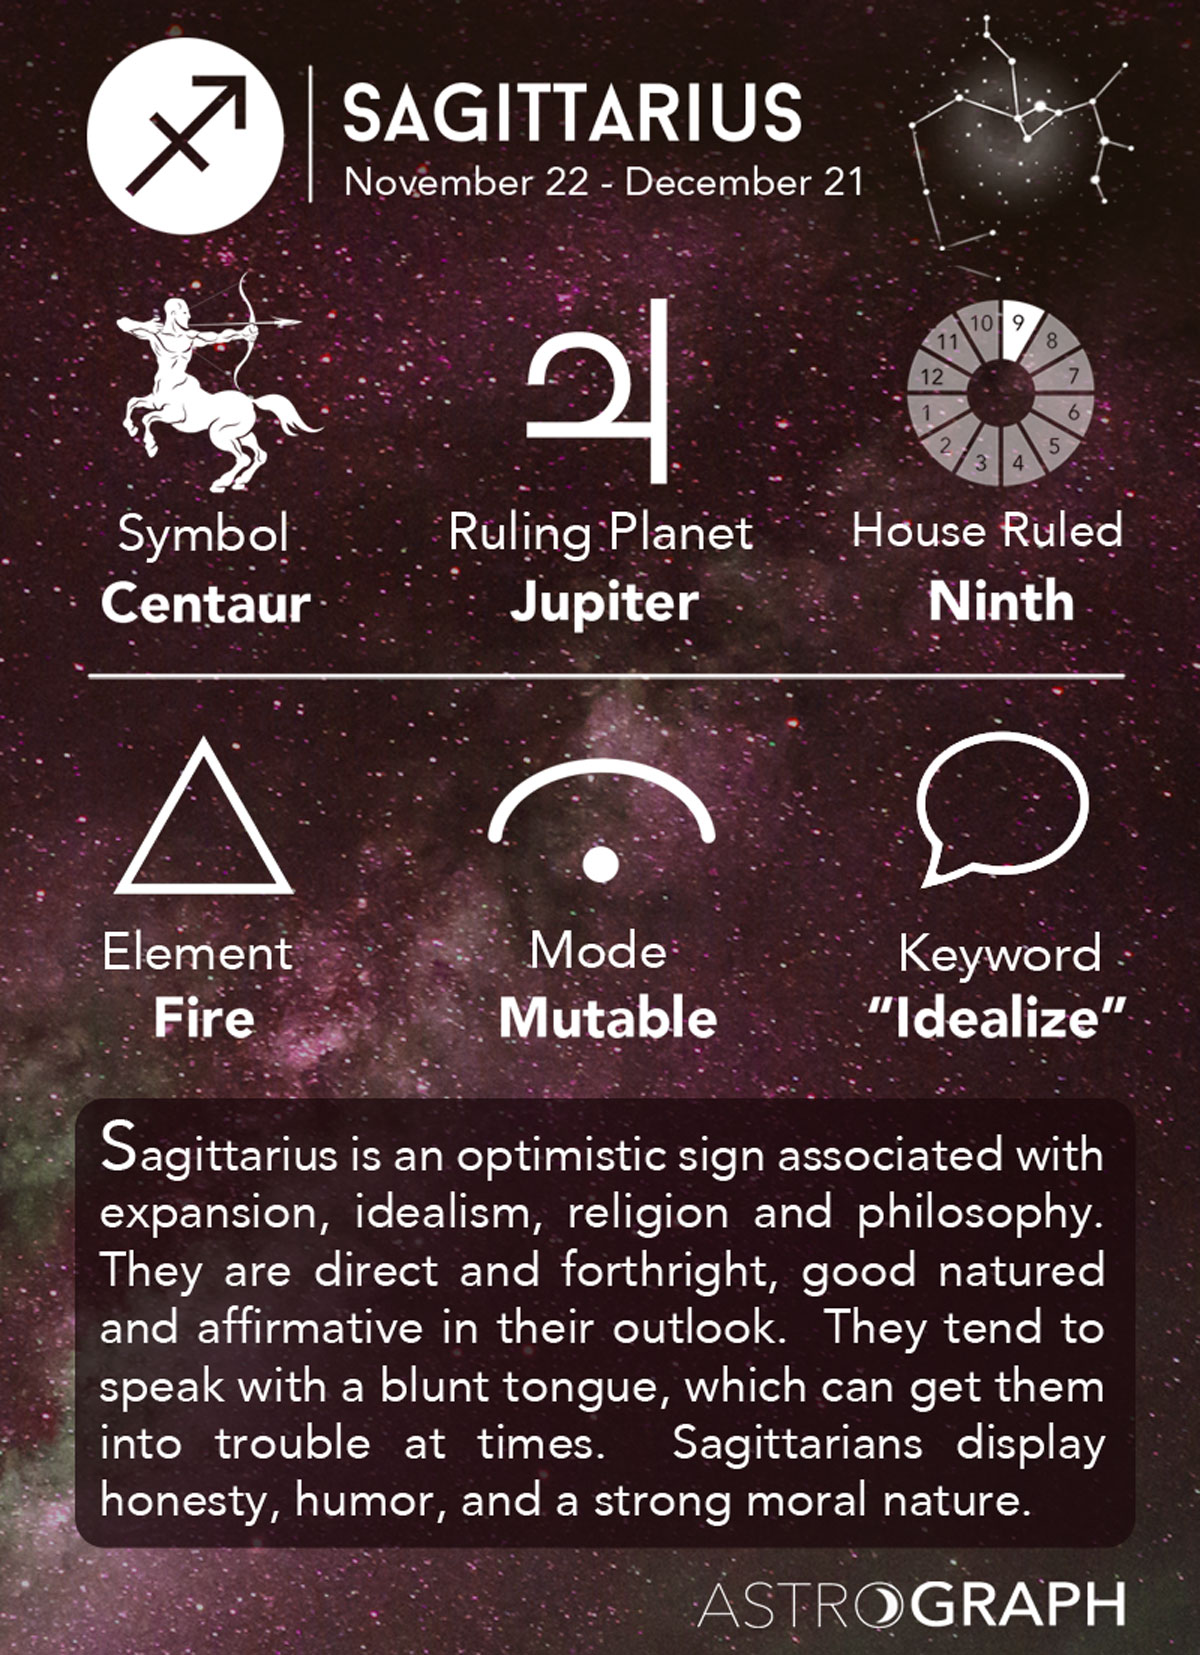 What is a sag in zodiac sign?